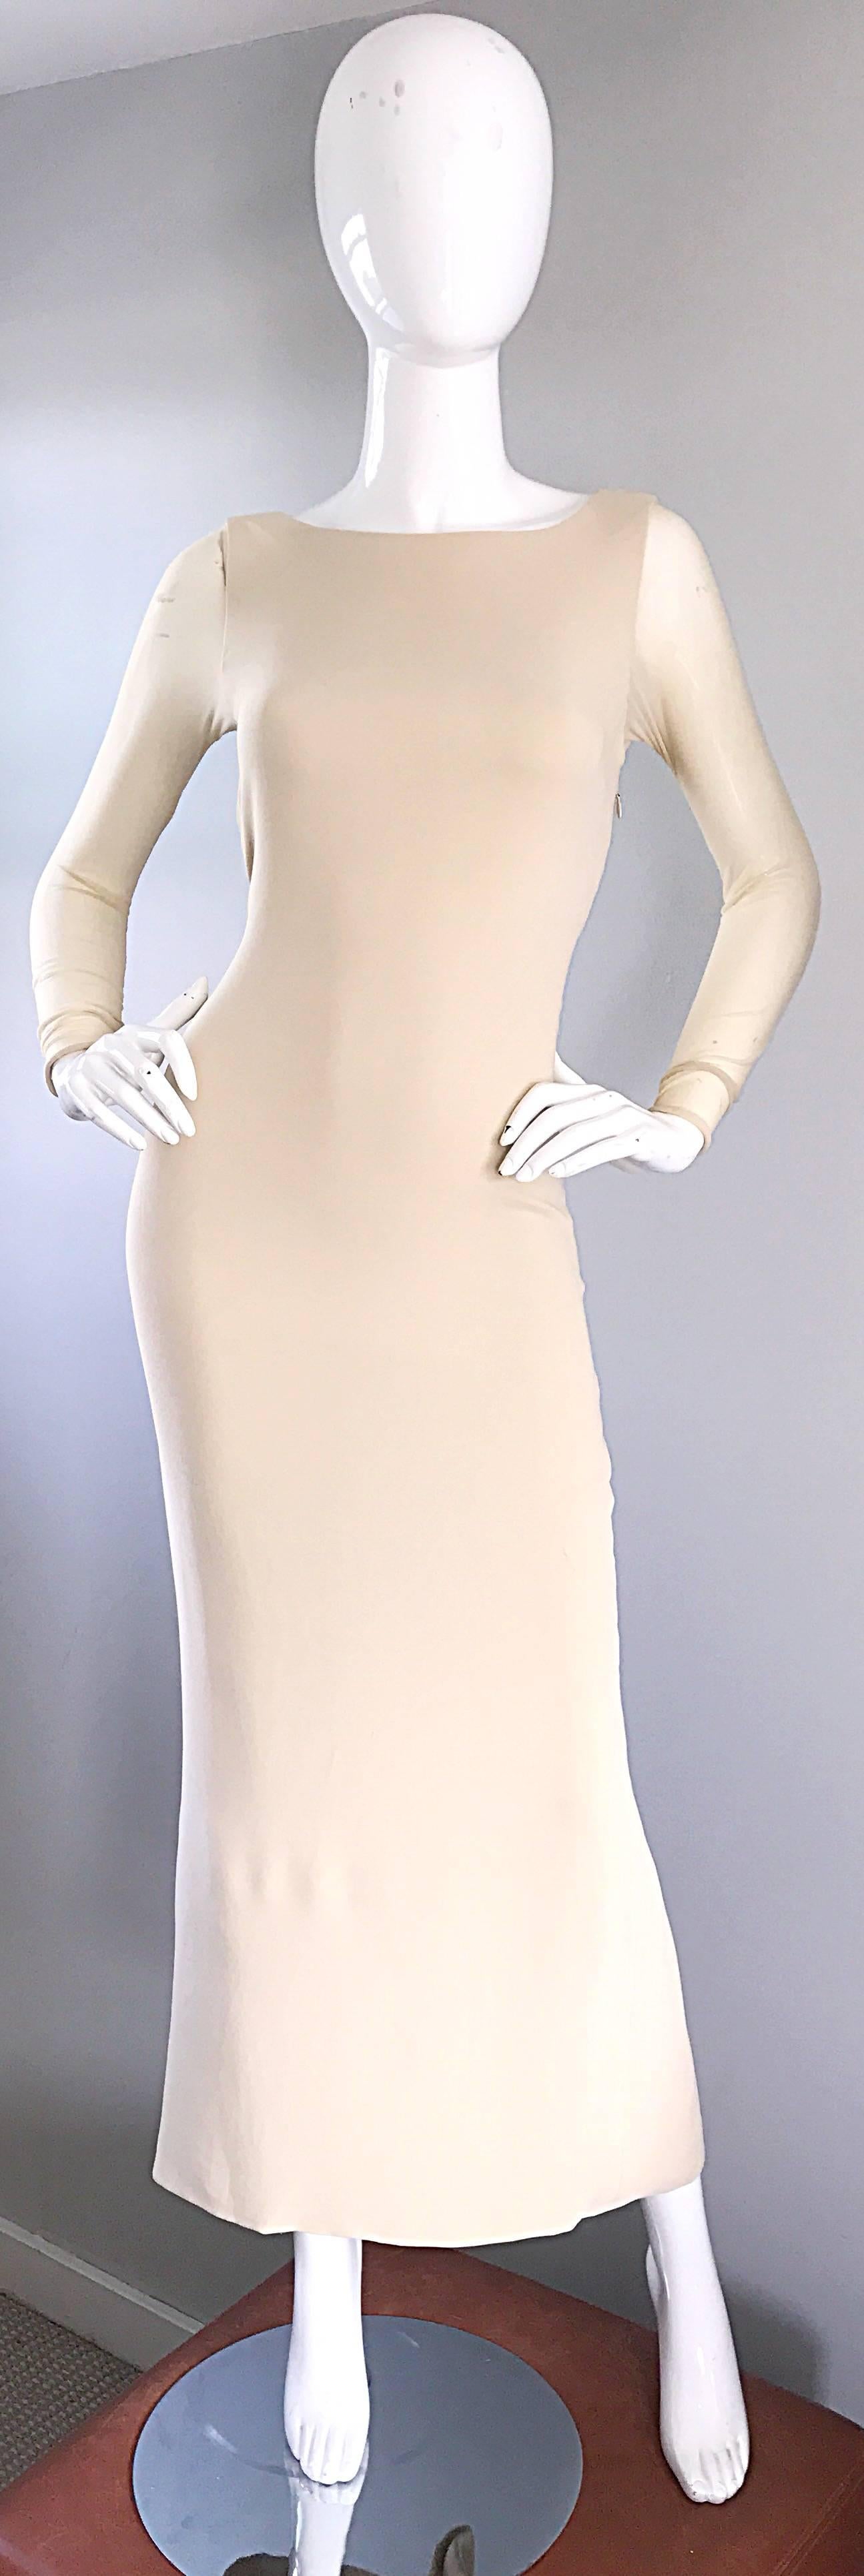 Stunning early 1990s VERA WANG nude / beige silk evening dress! Wonderful form fitting silhouette stretches to fit the body. Double. Layered silk with semi sheer mesh sleeves. Semi sheer low cut cut-out detail on the back with mesh details. Hidden